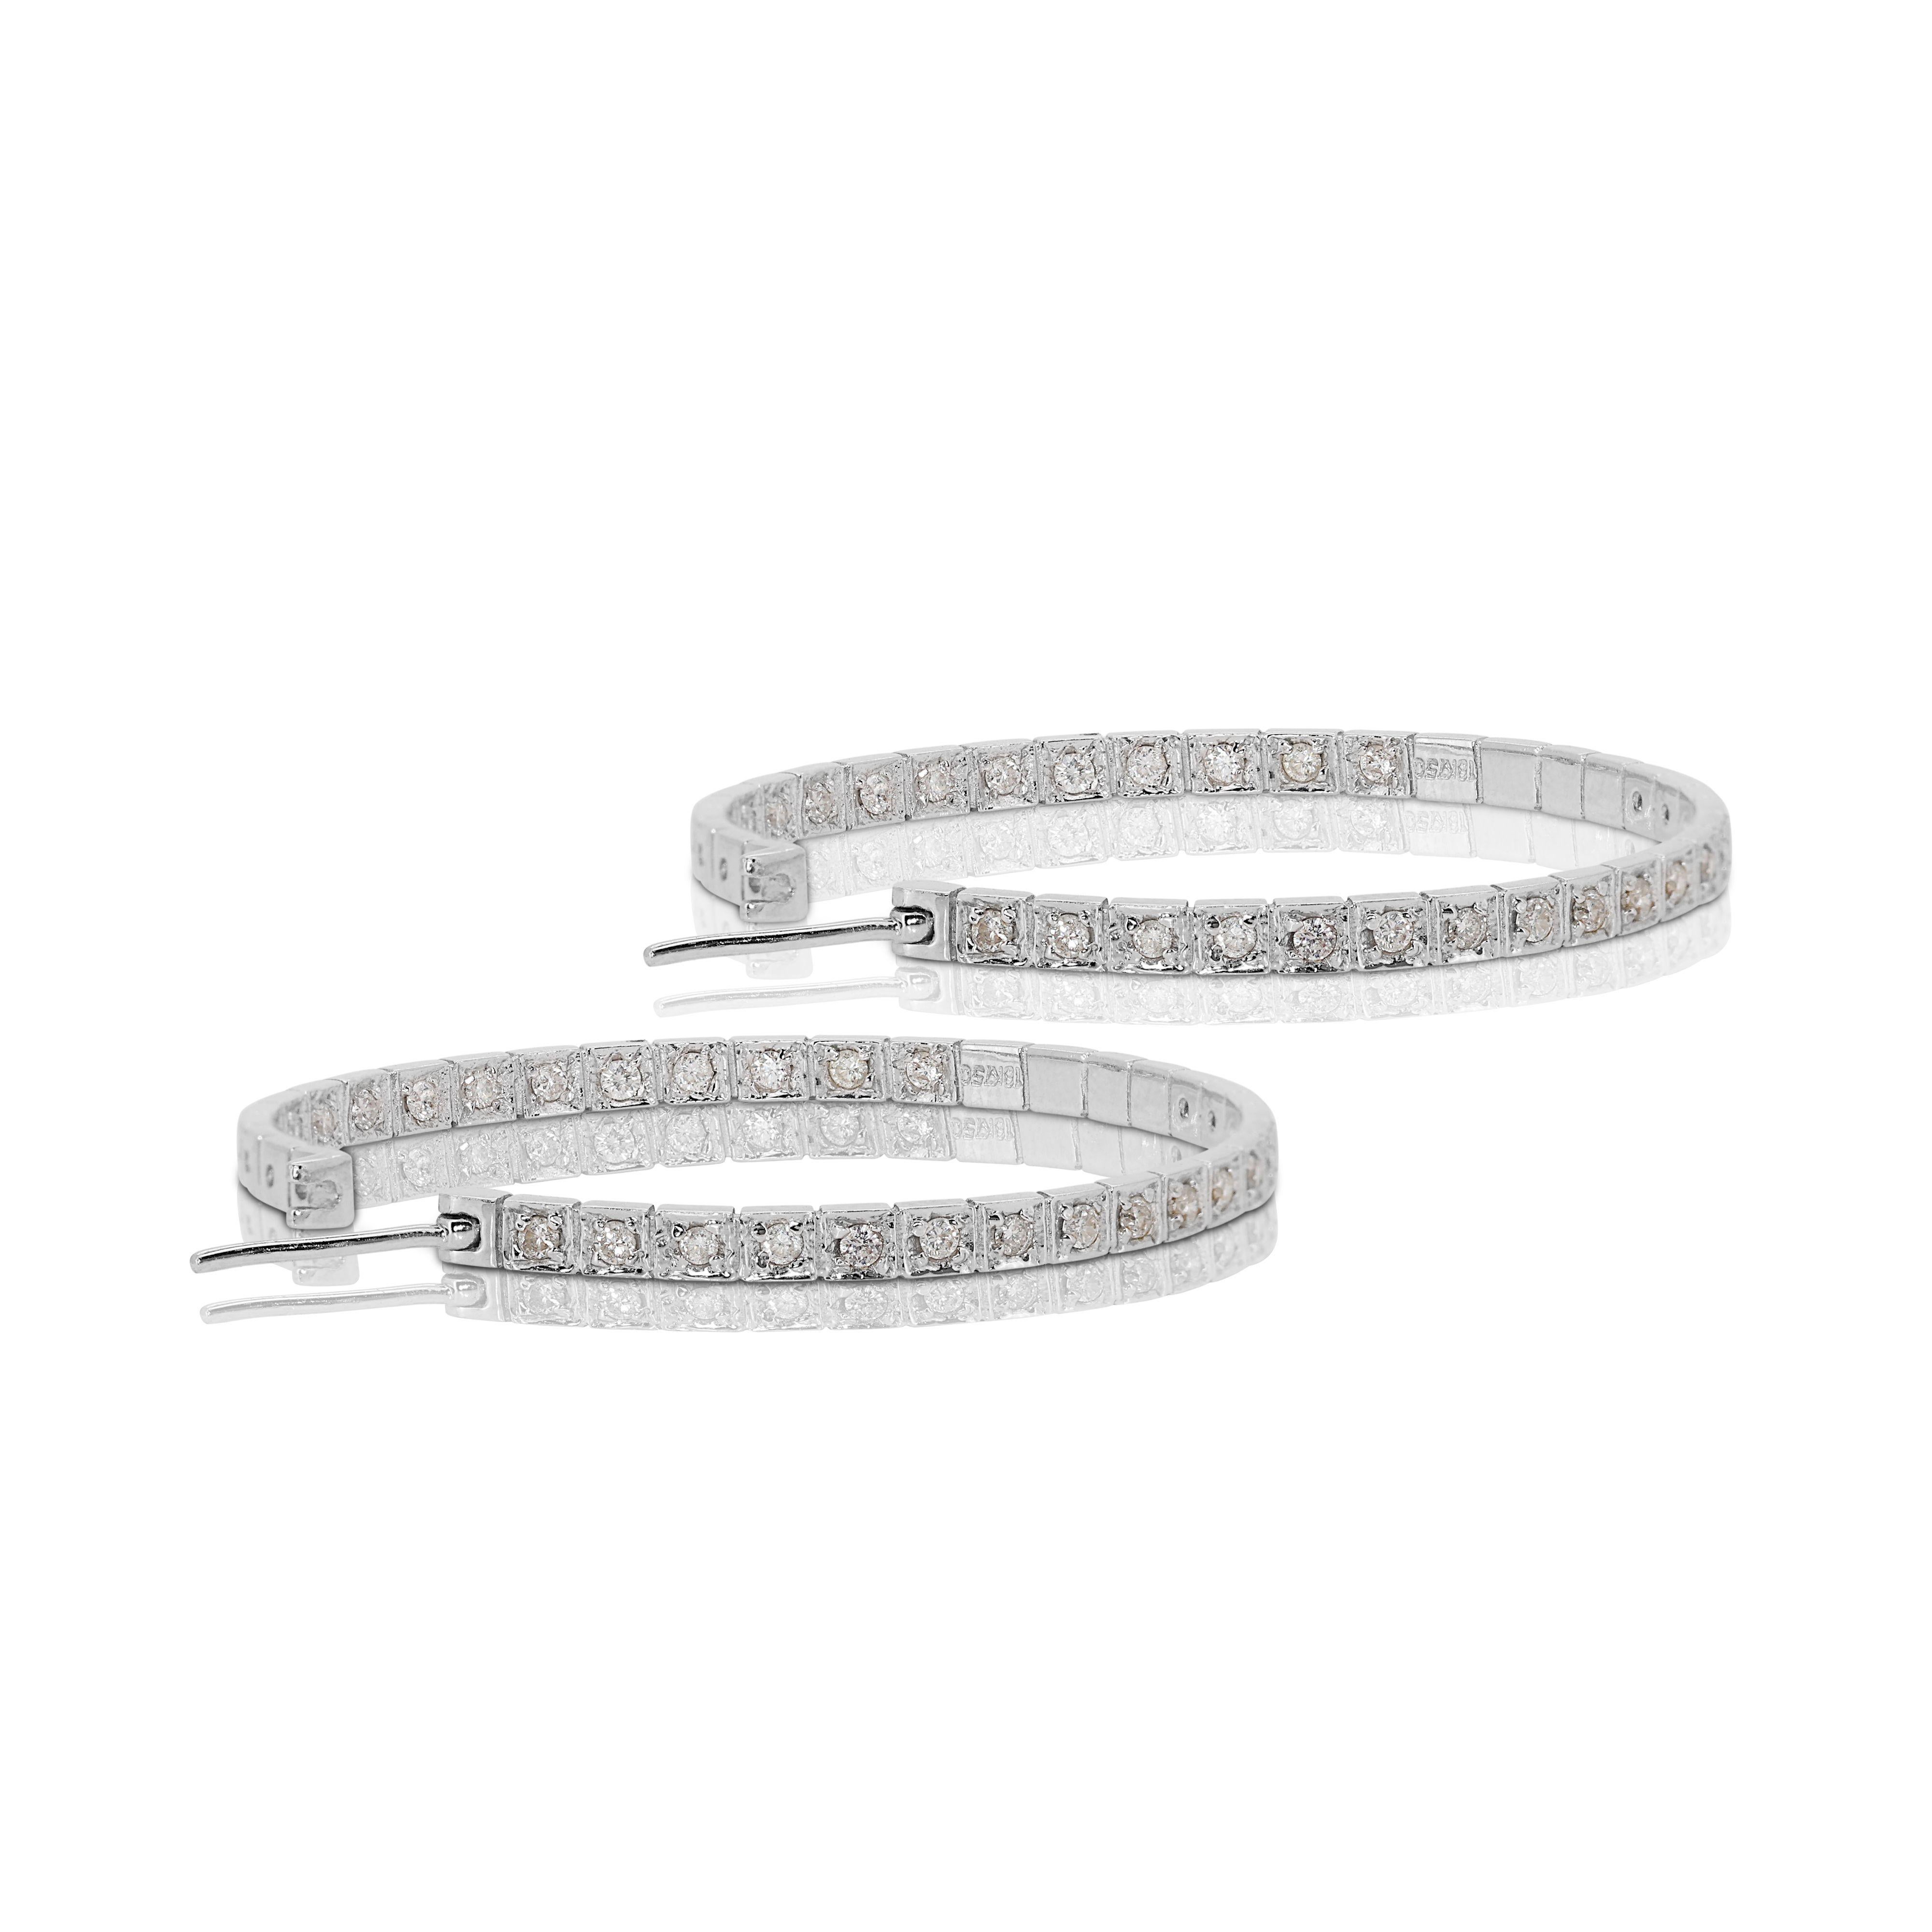 Elegant 18k White Gold Hoop Earrings with 1.36 Carat Weight of Natural Diamonds For Sale 1